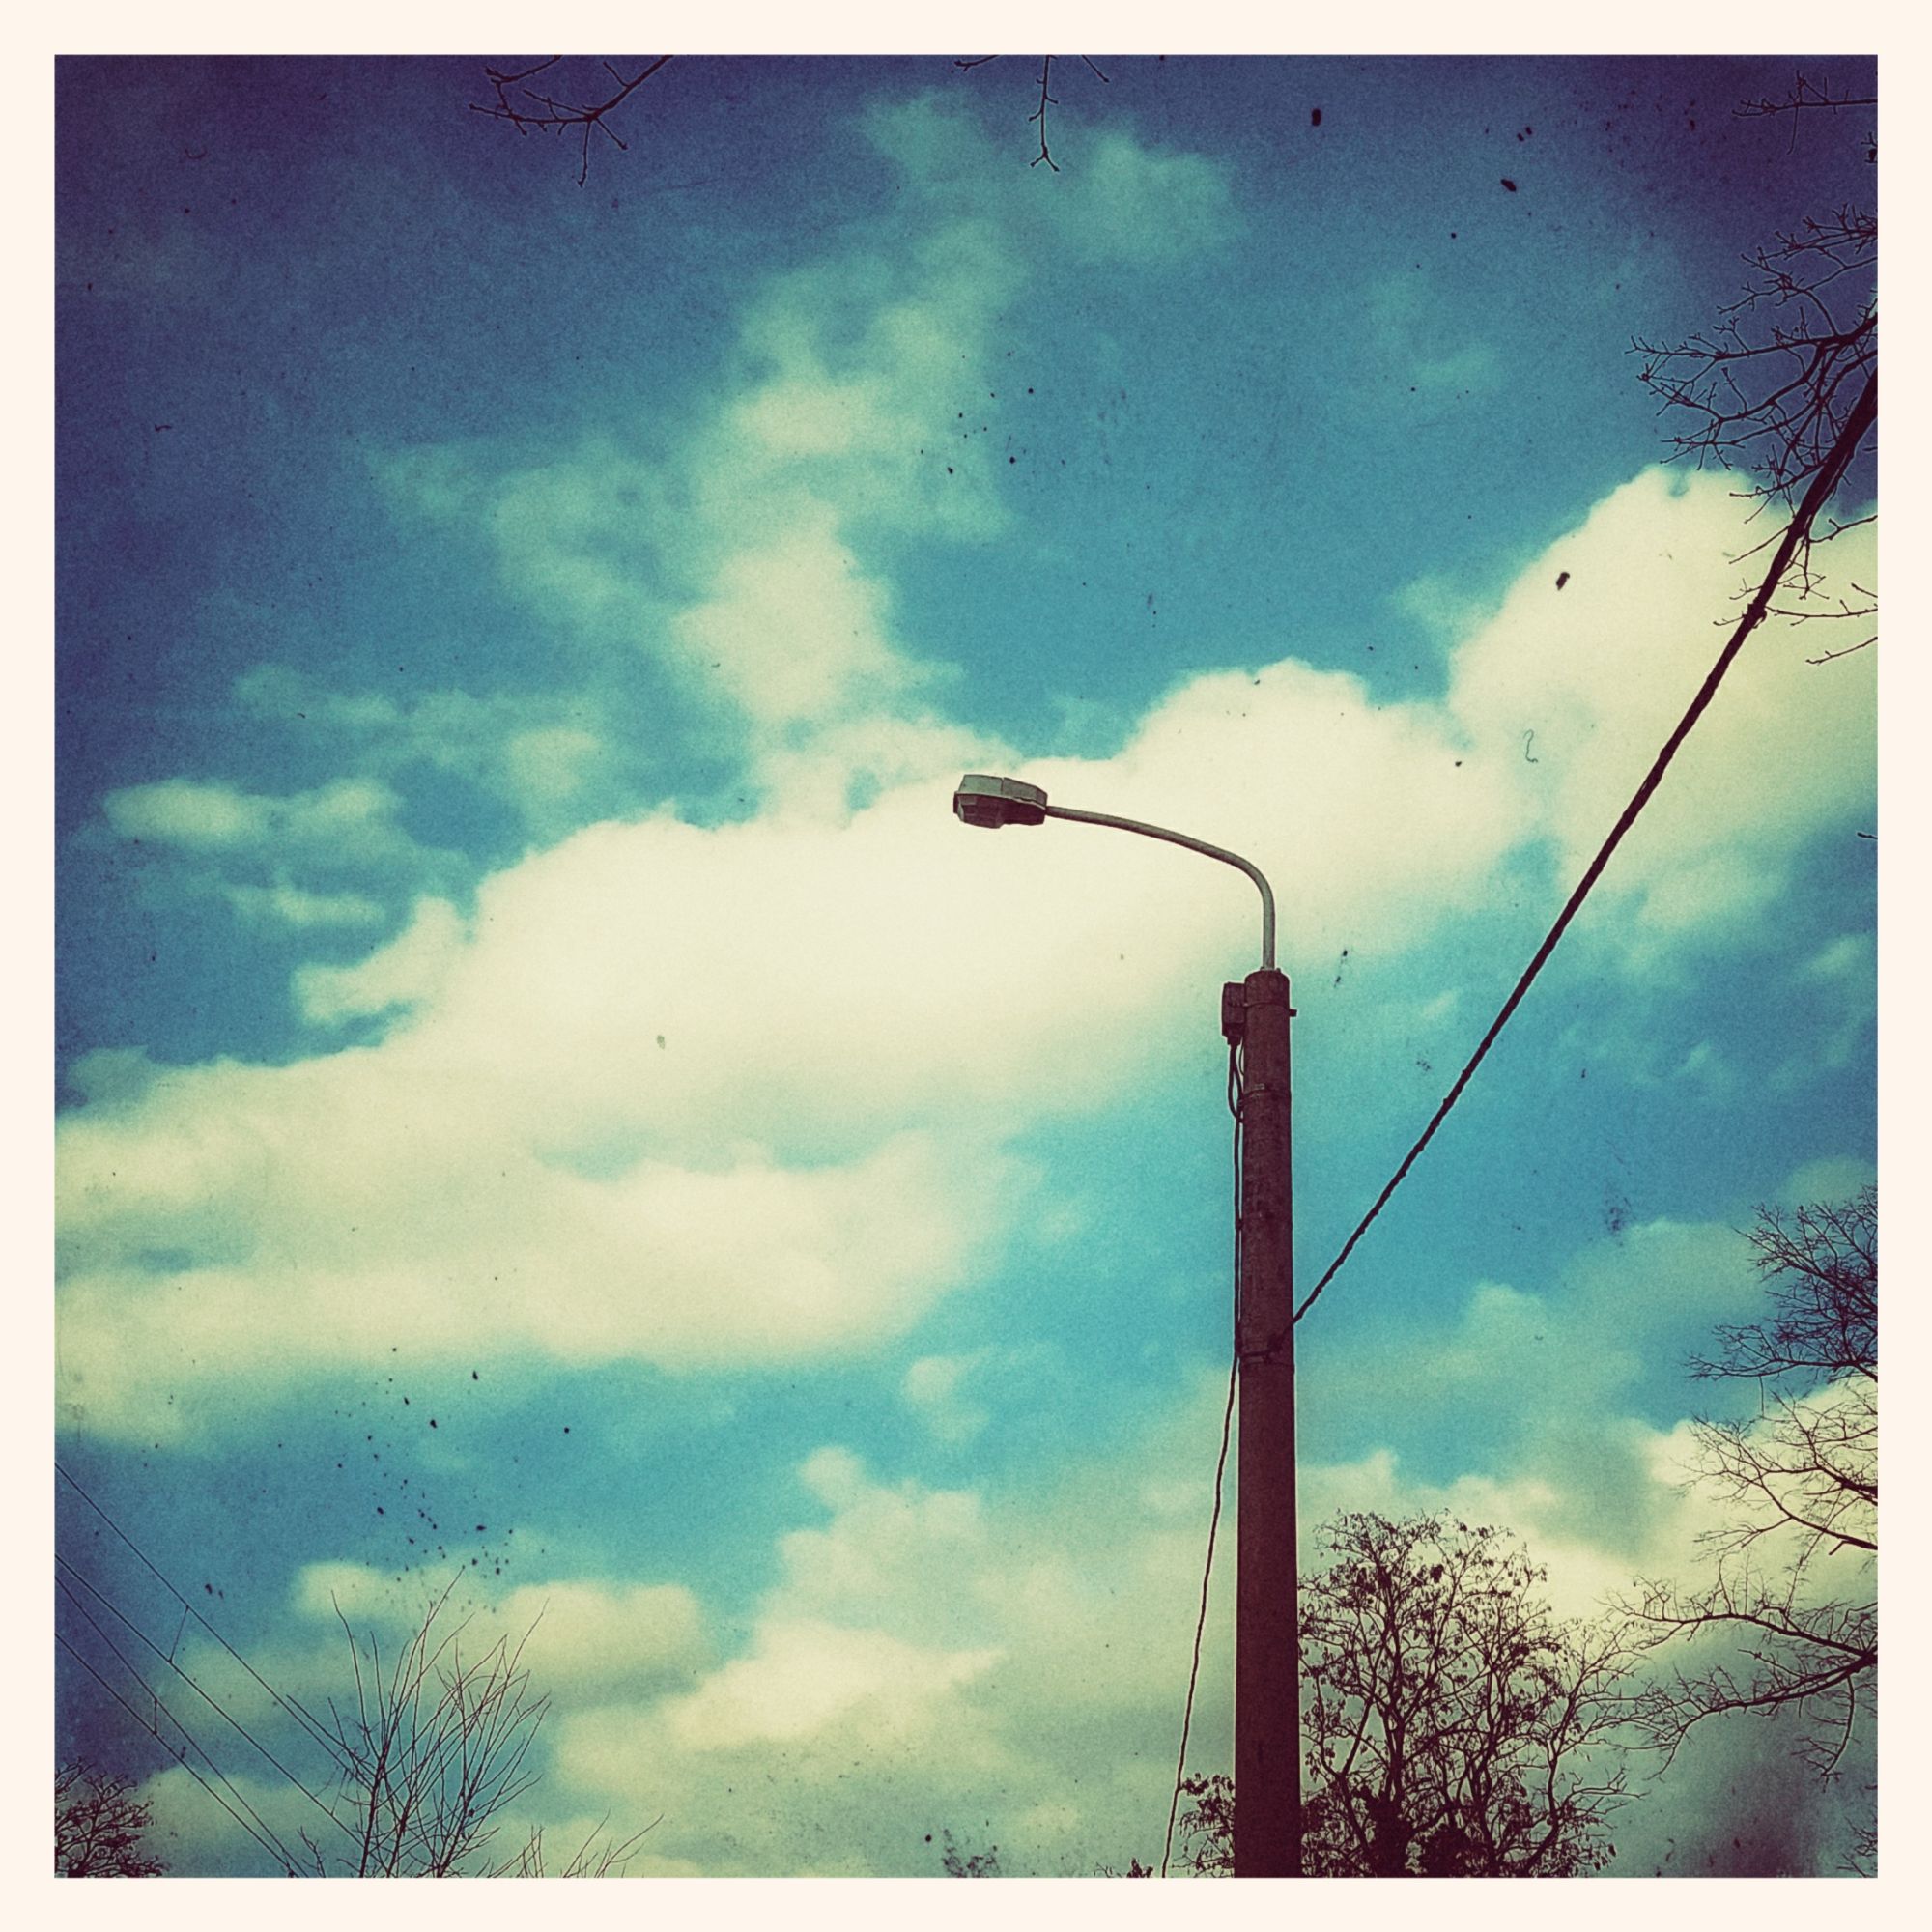 Streetlight and white clouds in front of a mostly blue sky. Vintage photo style.